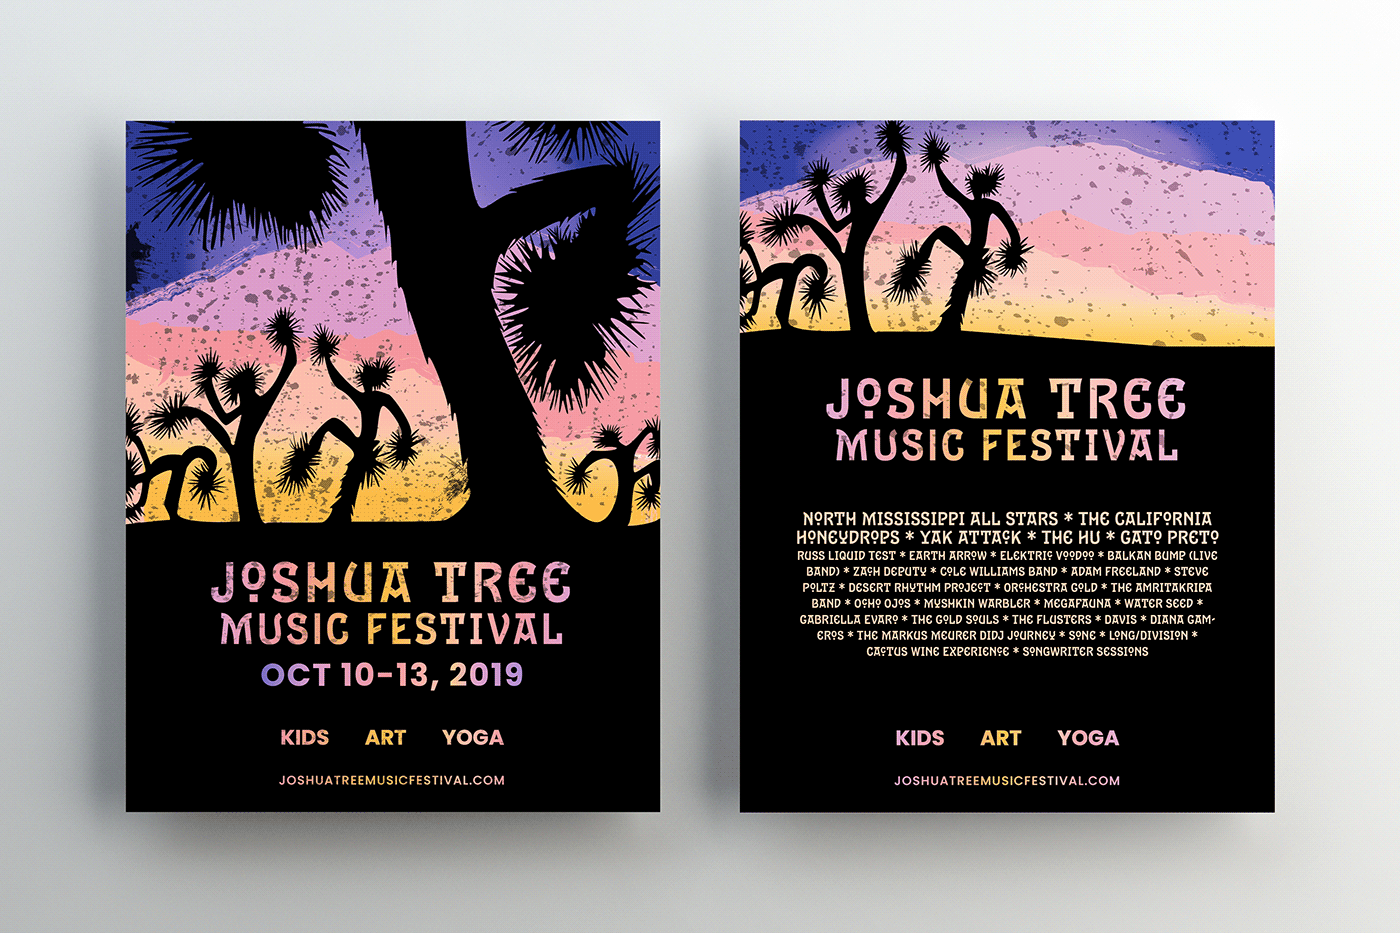 Joshua Tree Music Music Festival sunset mountains events poster  graphic design  Design event poster design poster Pen tool text and image